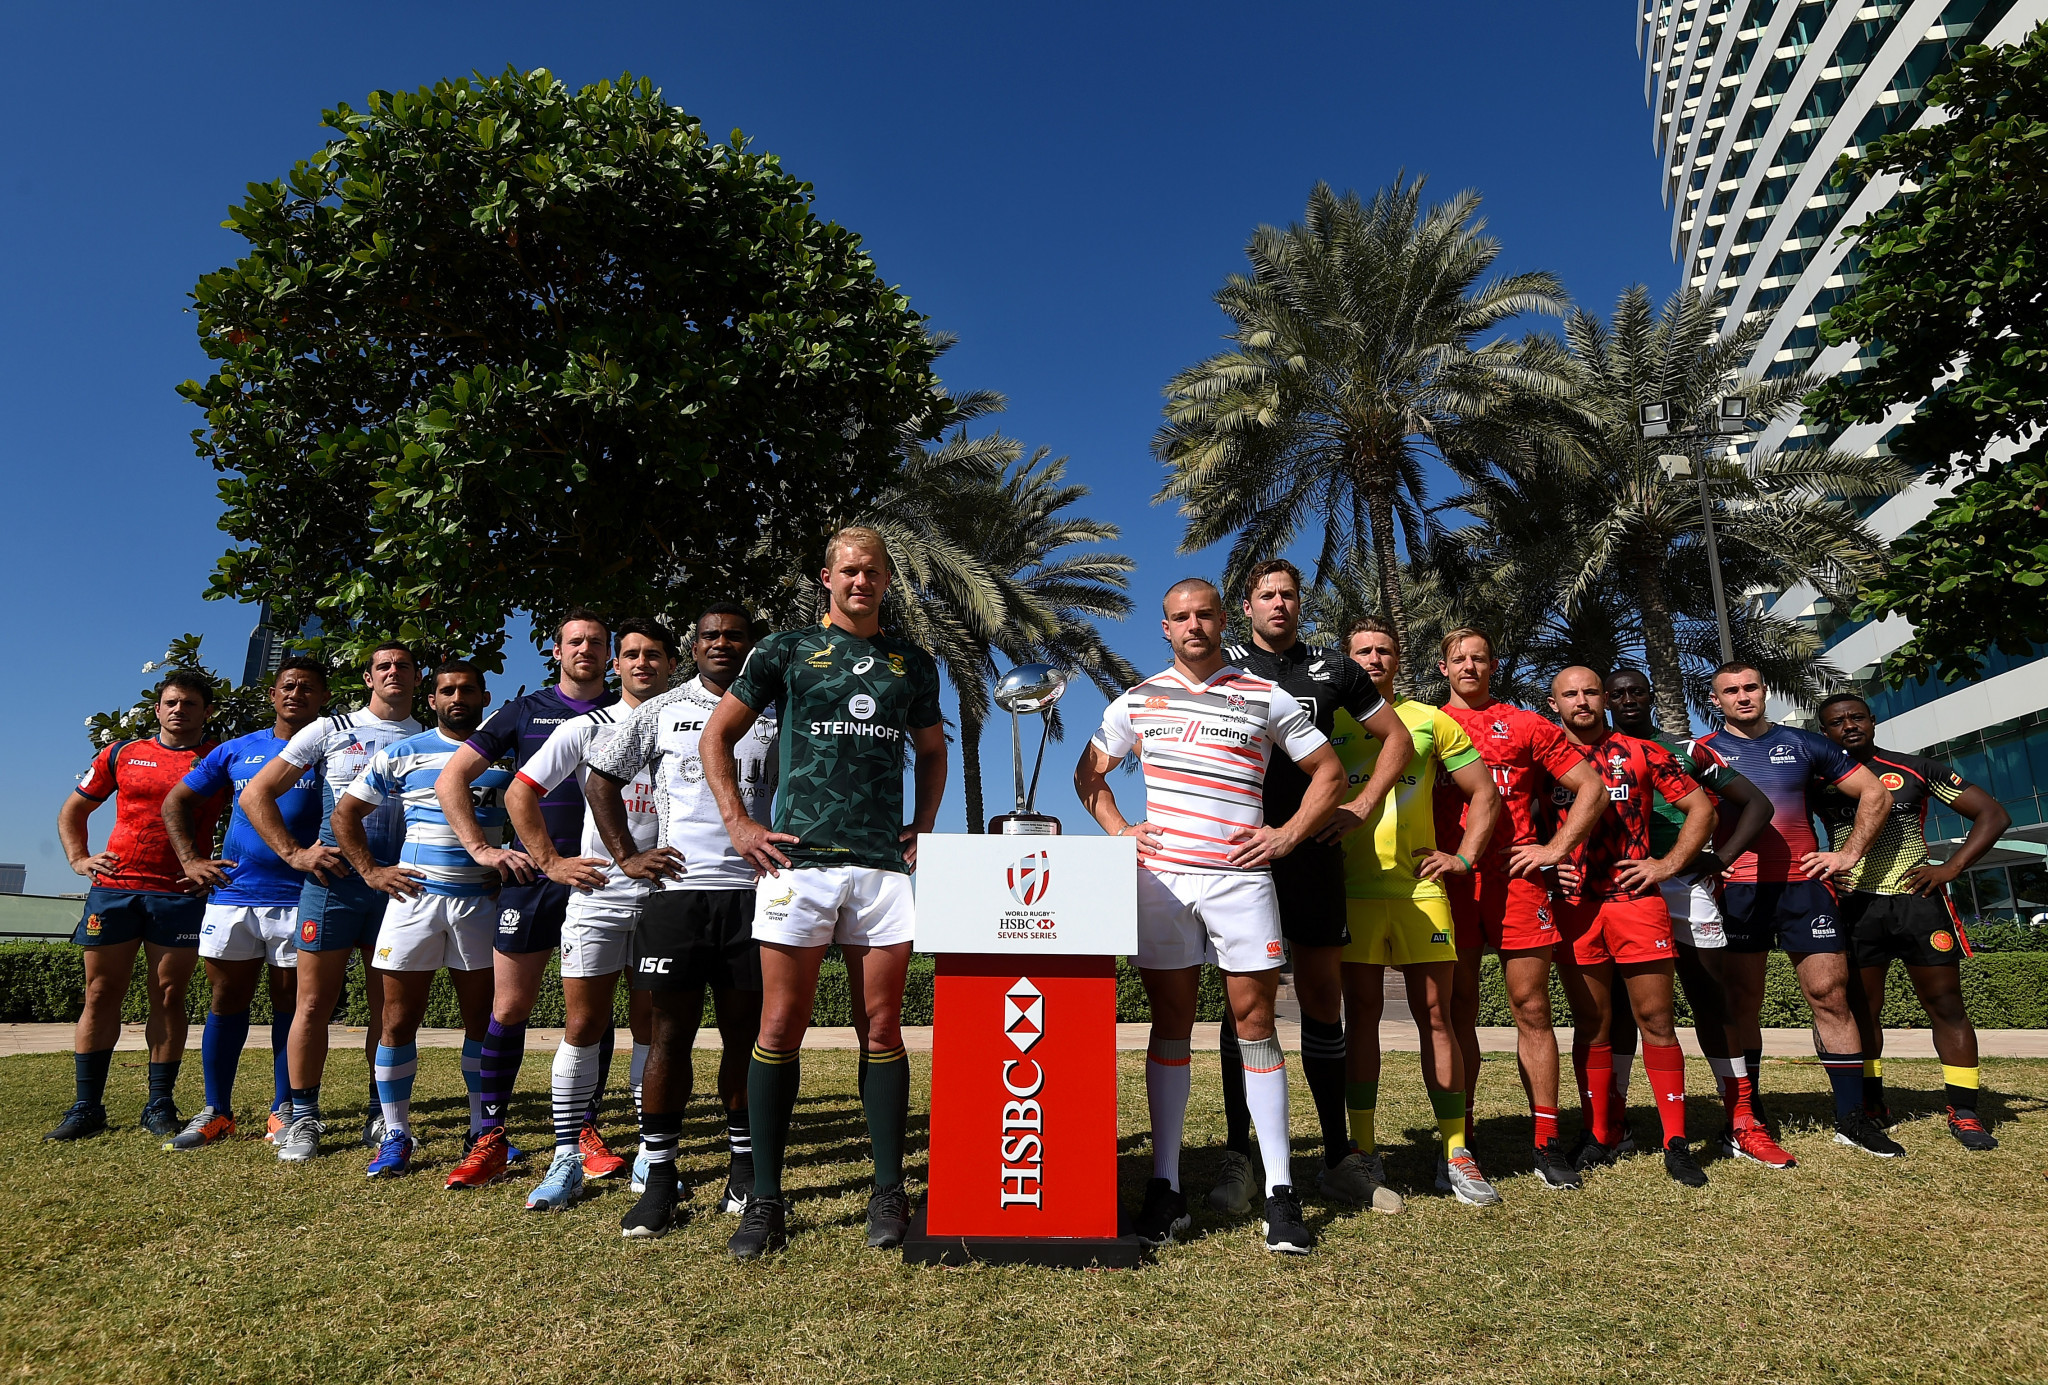 Men's team captains pose for photos with the Dubai Sevens Trophy during the Emirates Dubai Rugby Sevens: HSBC Sevens World Series photocall in Dubai, United Arab Emirates ©Getty Images